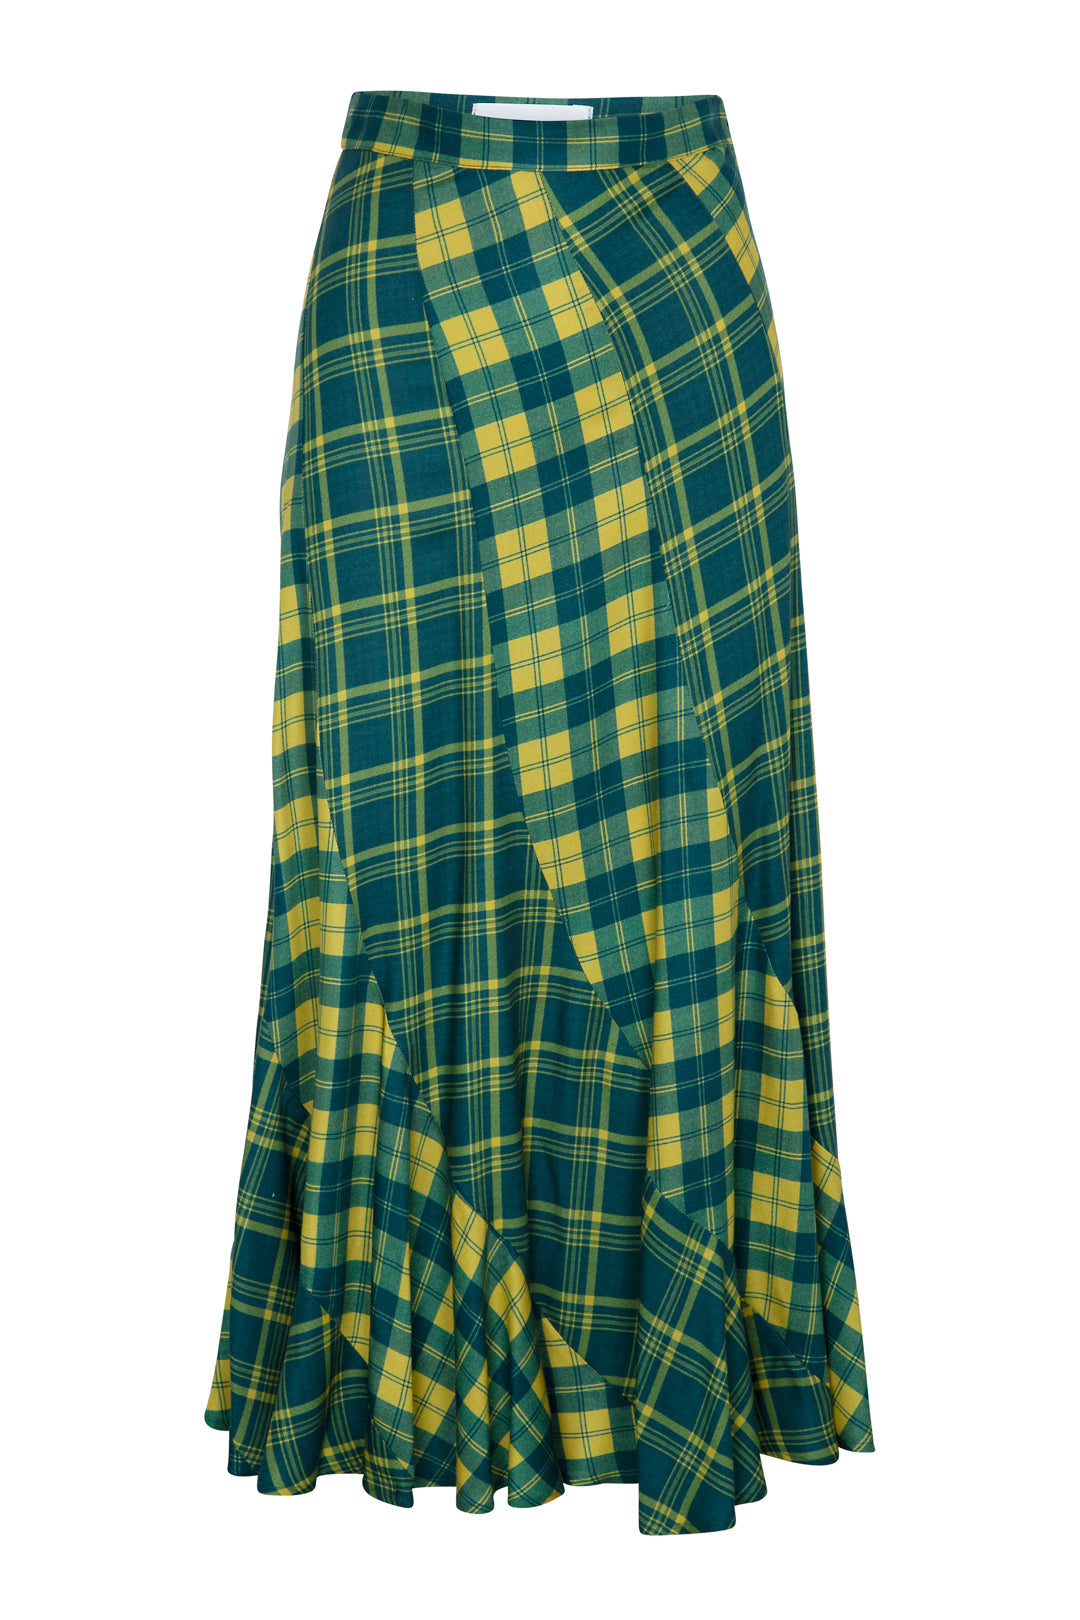 Galway Skirt - Wearitbe at LabelRow